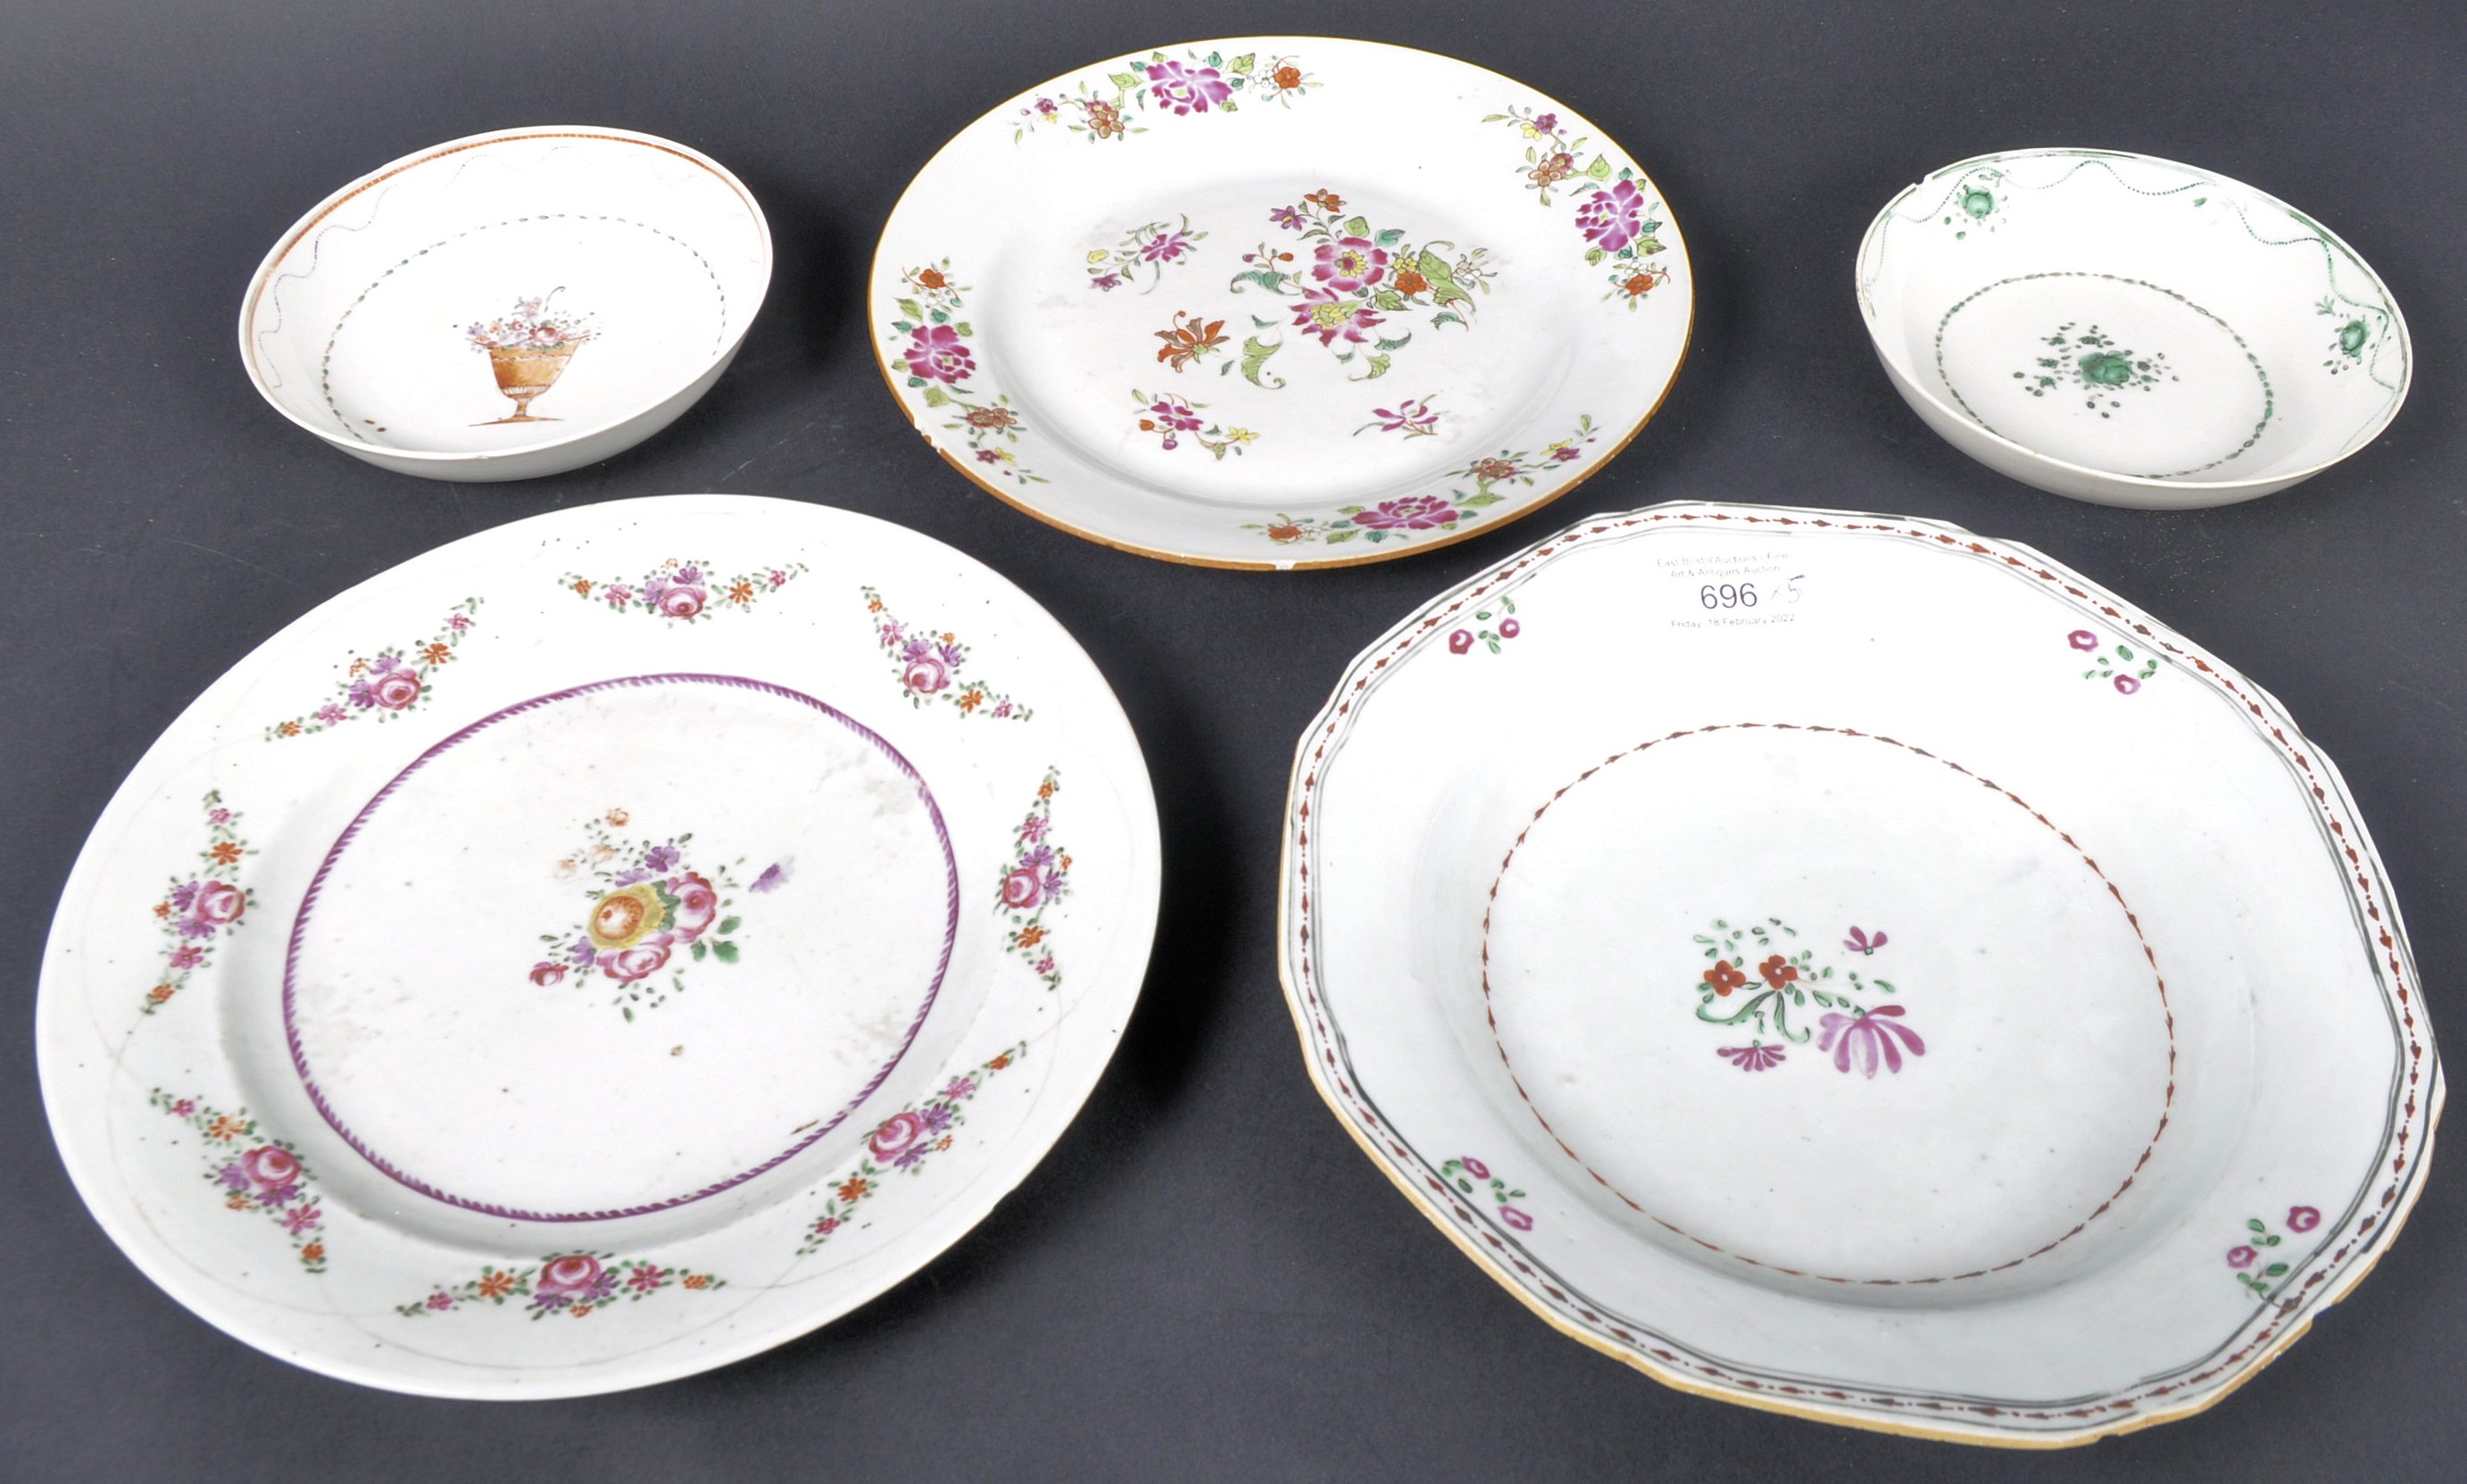 COLLECTION OF CHINESE EXPORT PORCELAIN